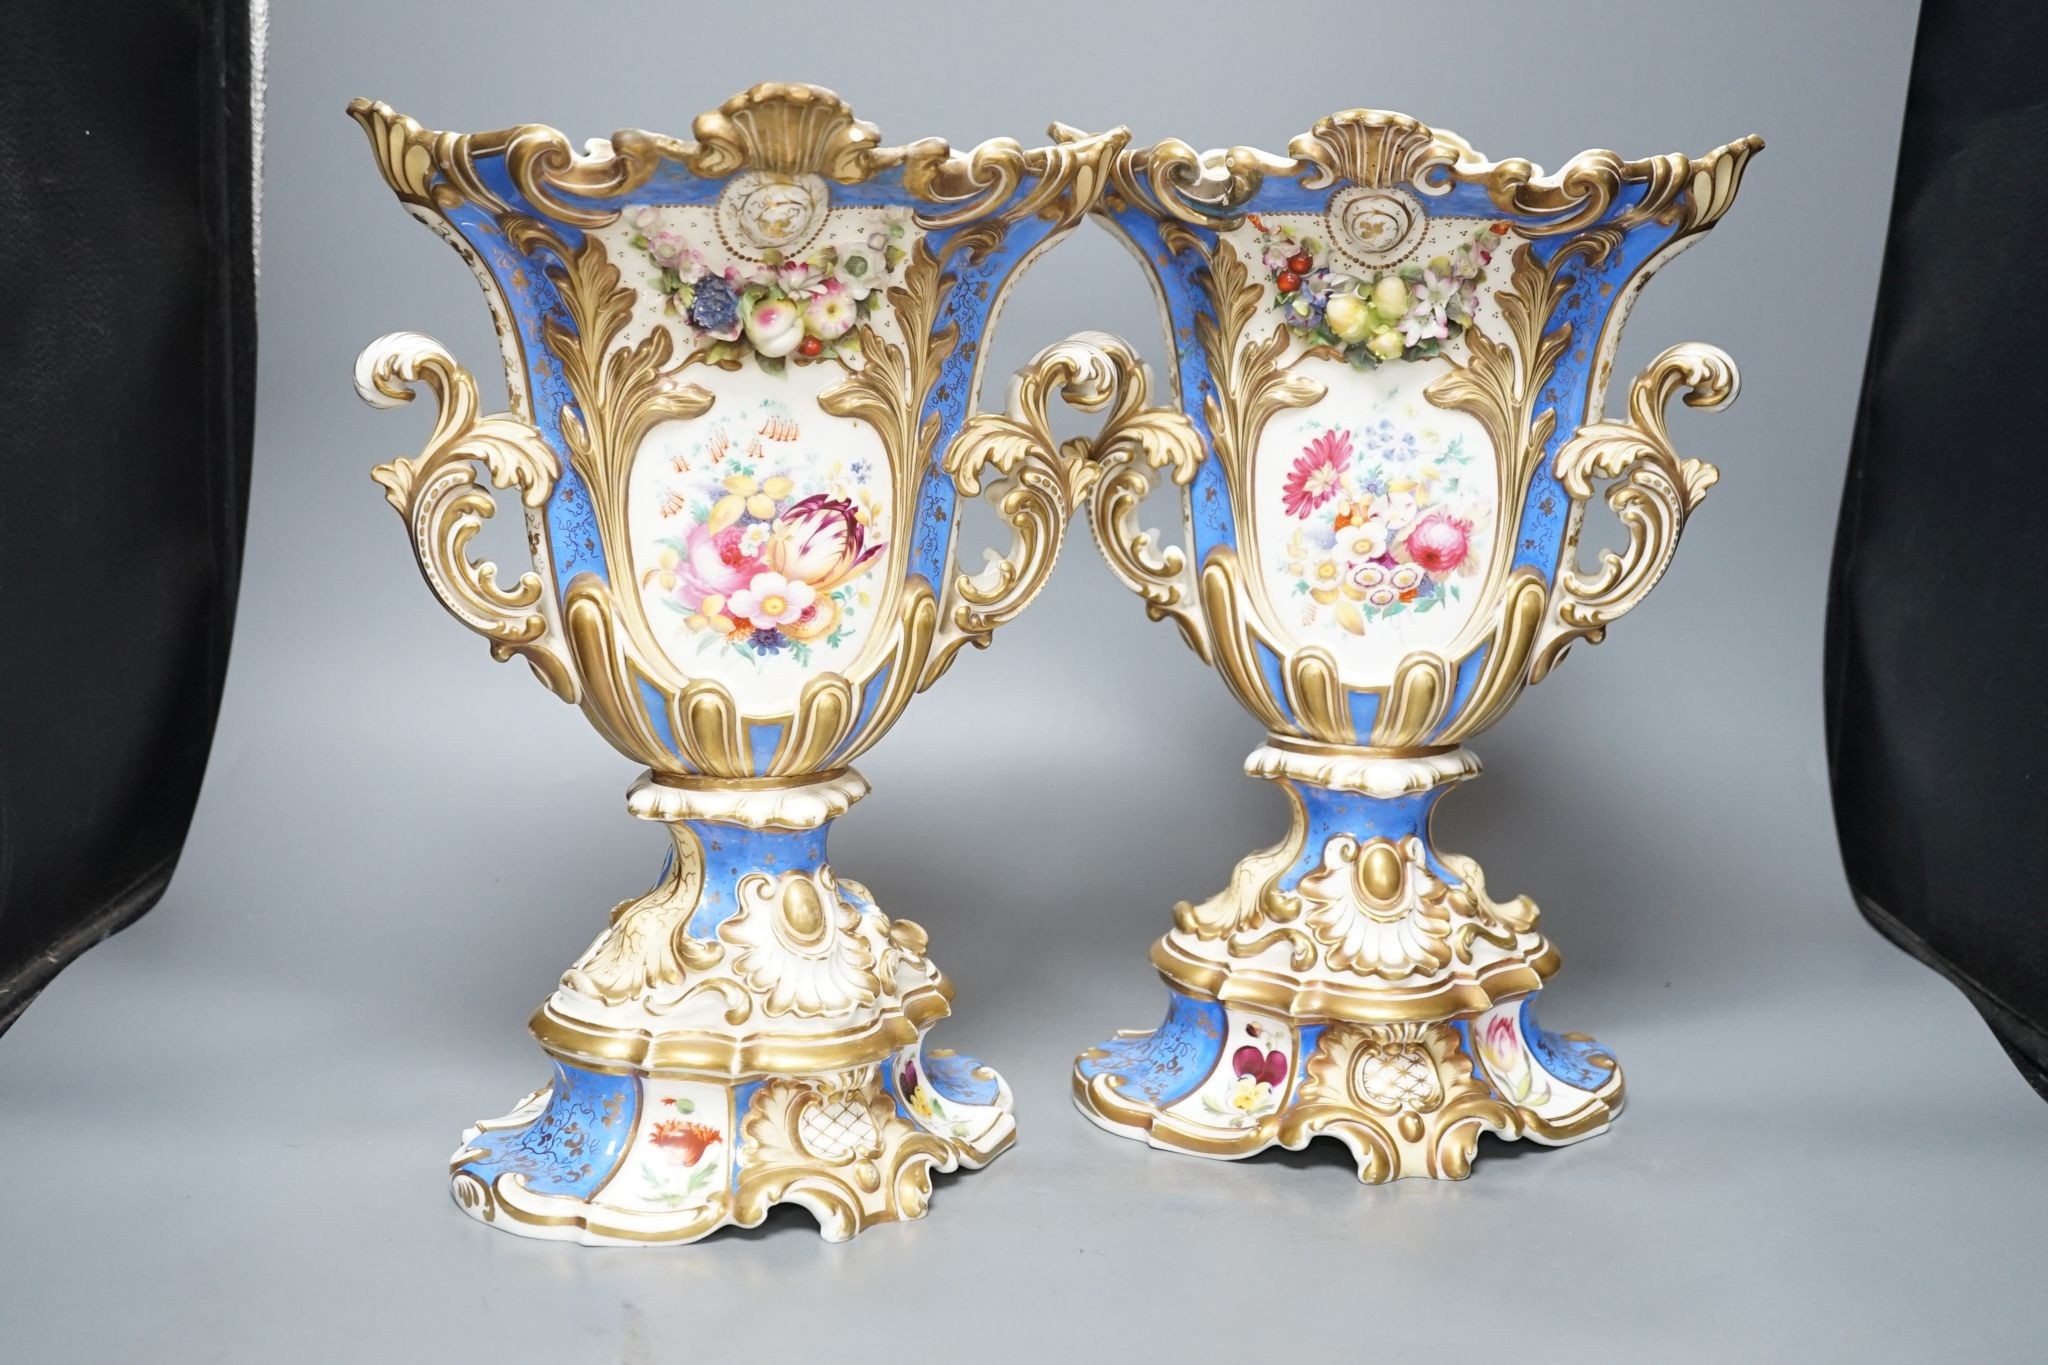 A large pair of 19th century Grainger & Co. vases with scenes of Worcester and Malvern on a blue ground, 34 cms high.